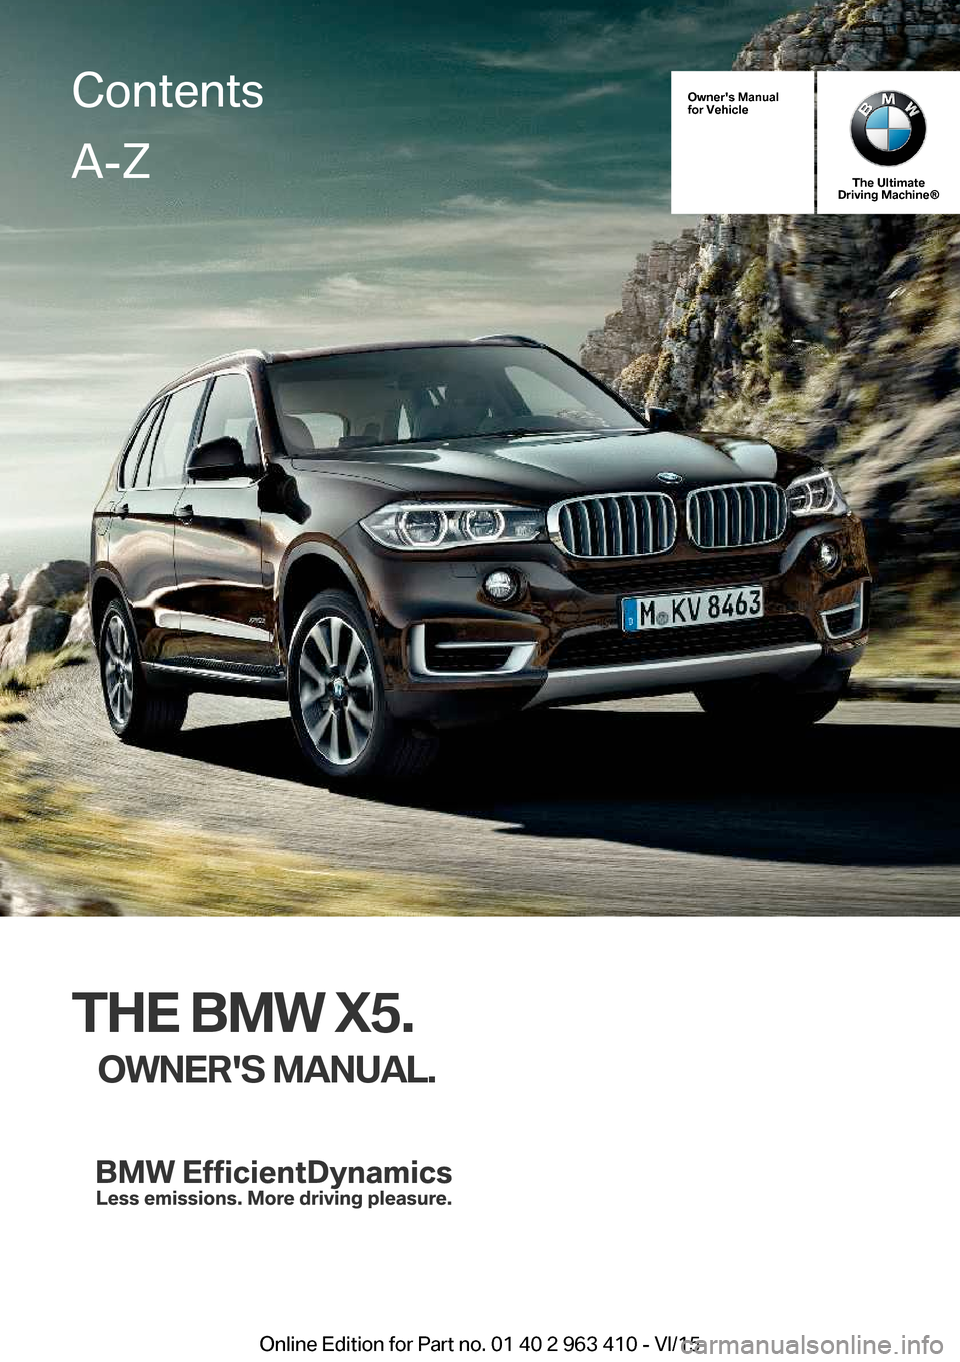 BMW X5 2016 F15 Owners Manual Owners Manual
for Vehicle
The Ultimate
Driving Machine®
THE BMW X5.
OWNERS MANUAL.
ContentsA-Z
Online Edition for Part no. 01 40 2 963 410 - VI/15   